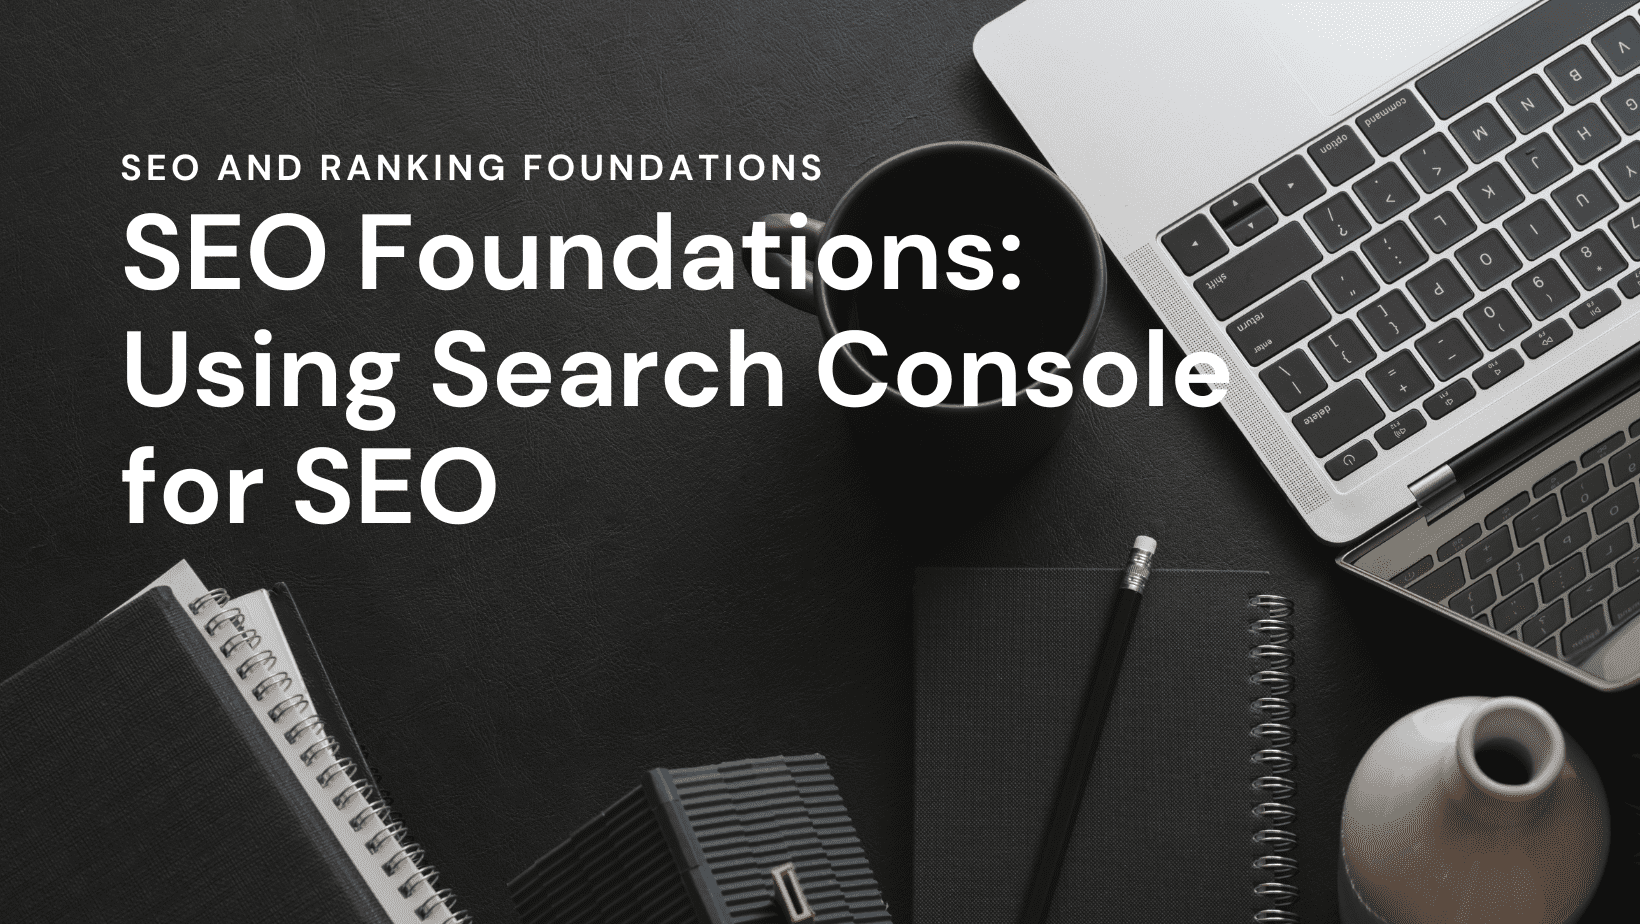 SEO Foundations: Using Search Console for SEO